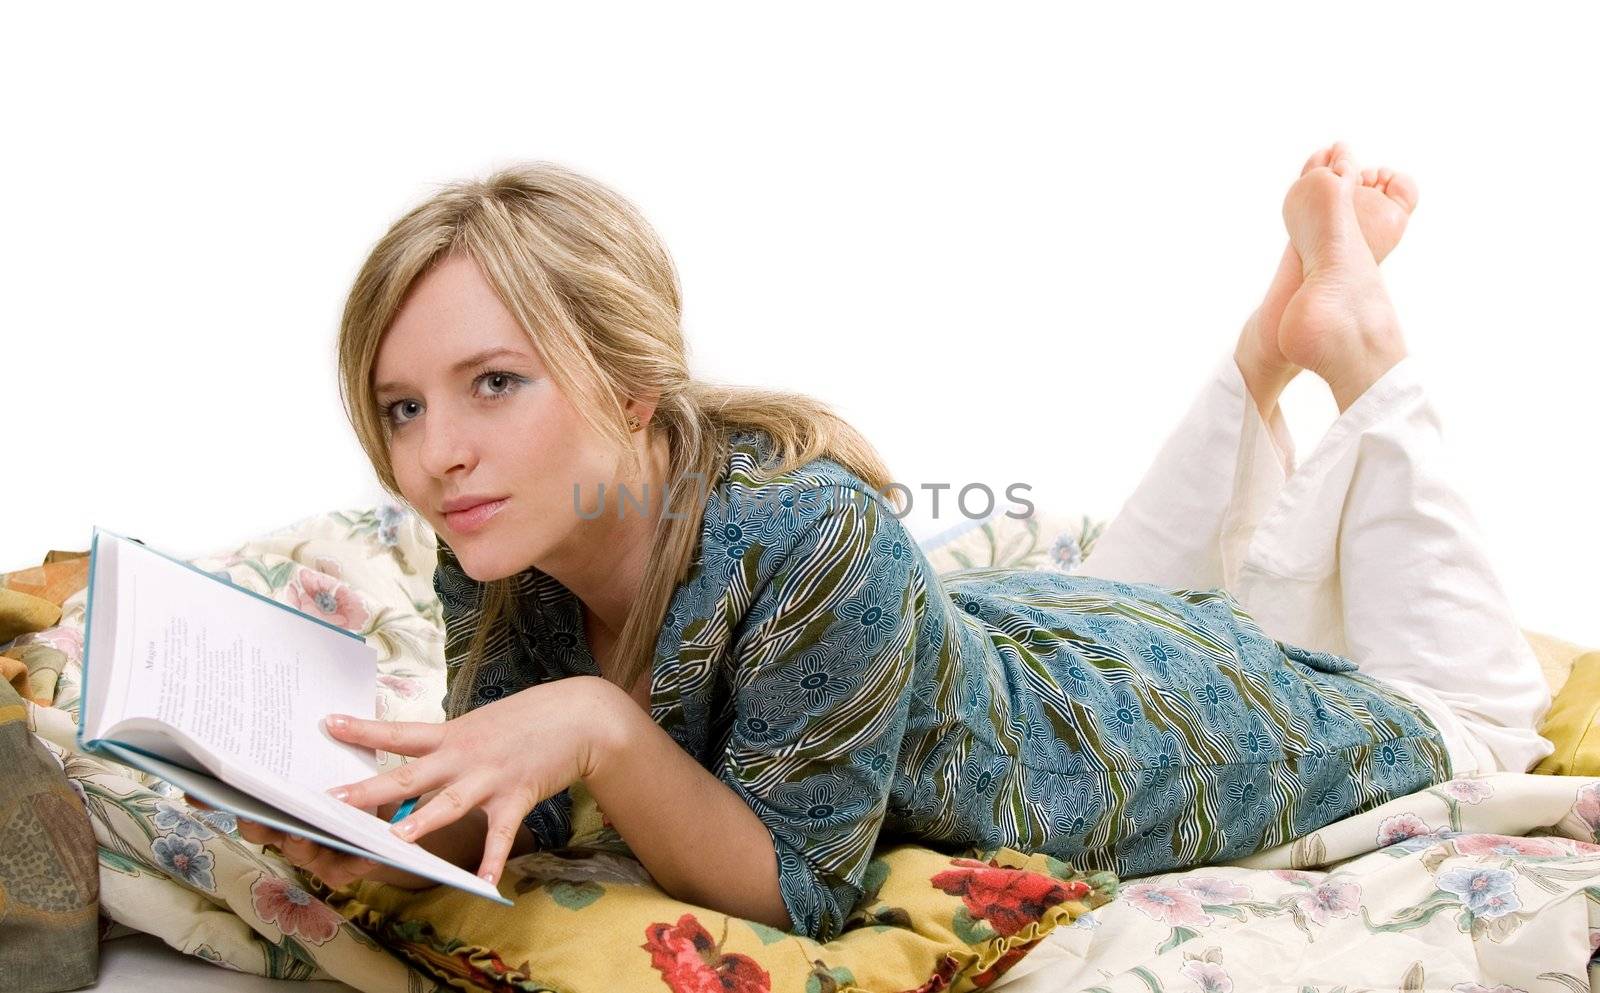 woman is reading book, separate on white